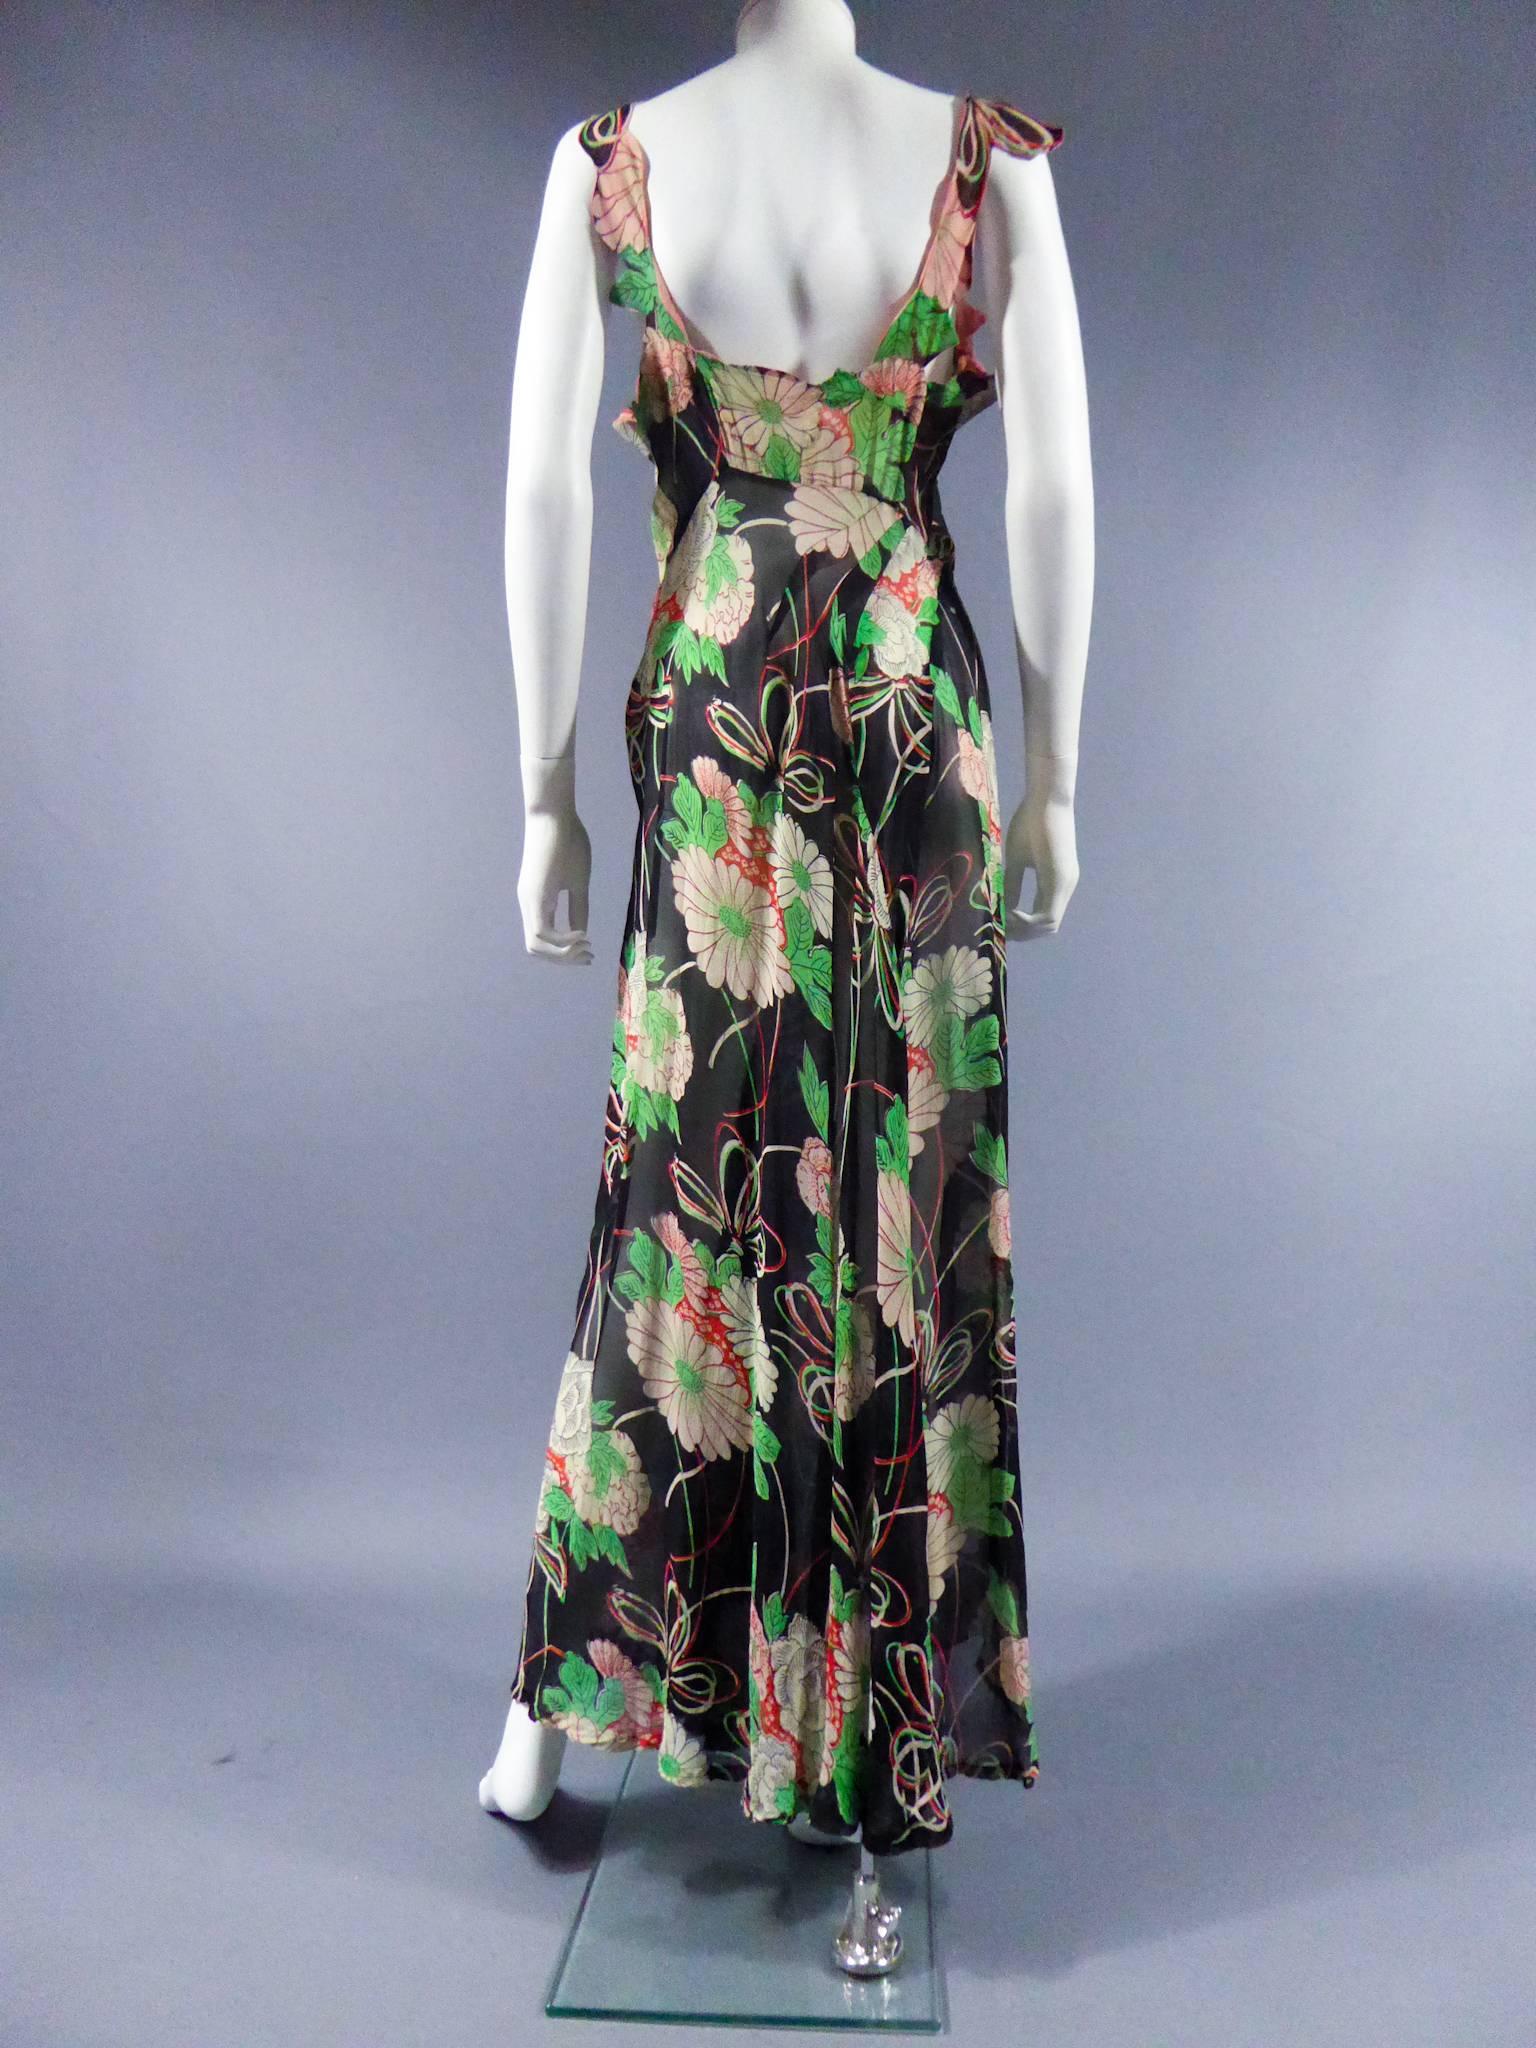 Circa 1930

England

Flowered printed dress with black background and pink flowers highlighted with red and green leaves. Details of cutouts according to the shape of the flowers on the bodice of the dress creating a flap opening. Slightly